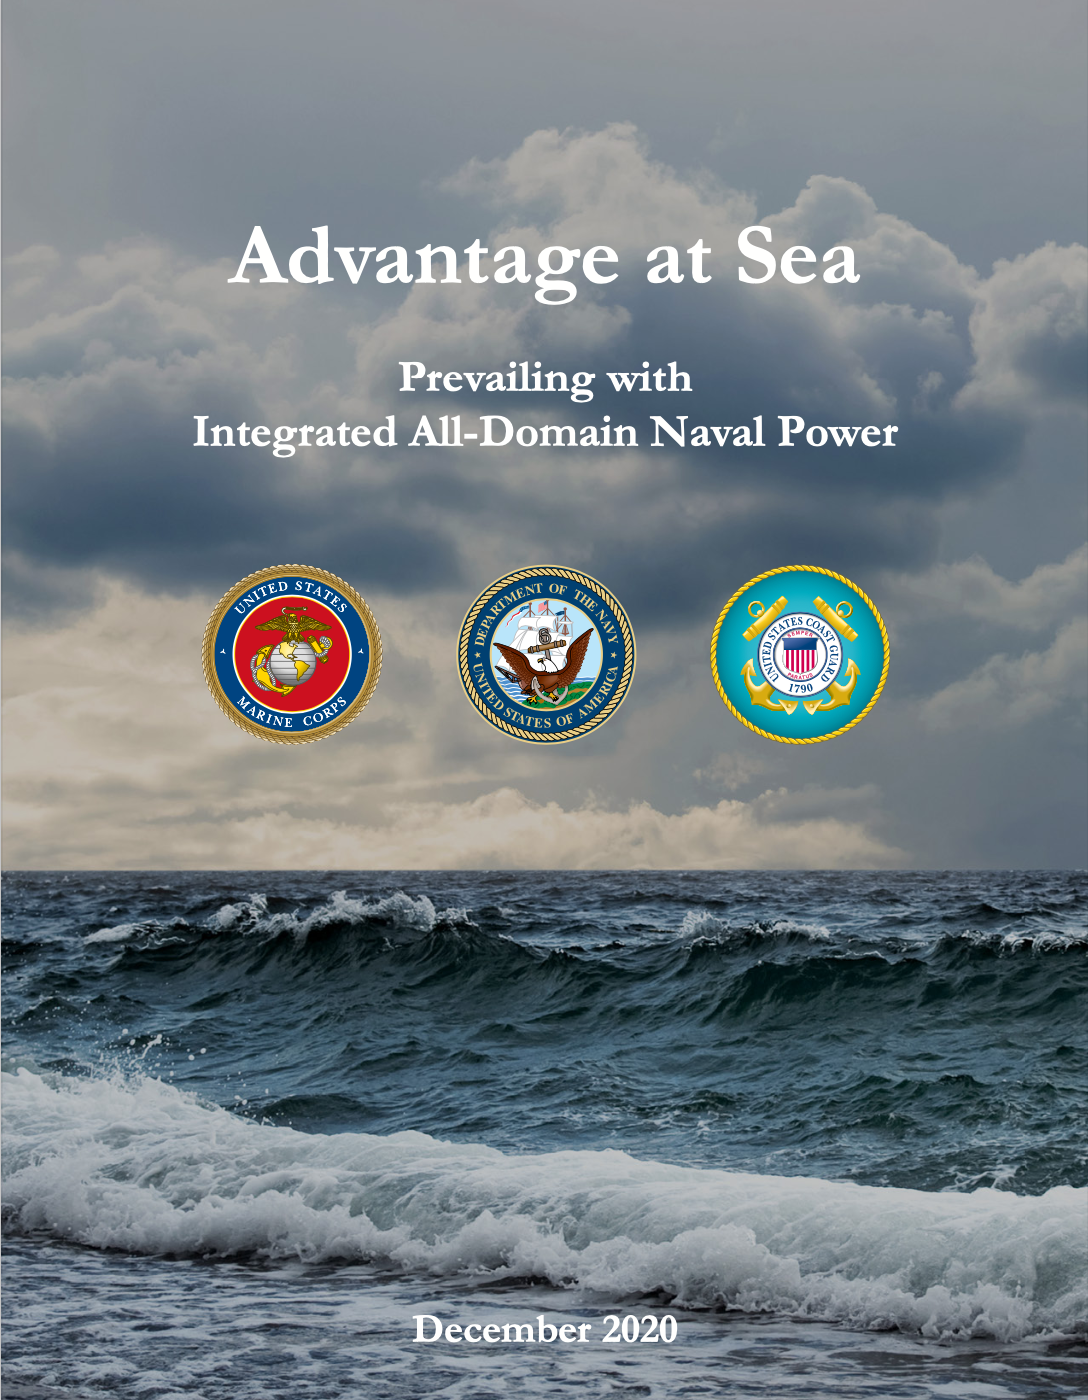 New joint Maritime Strategy issued by Navy, Marine Corps, and Coast Guard